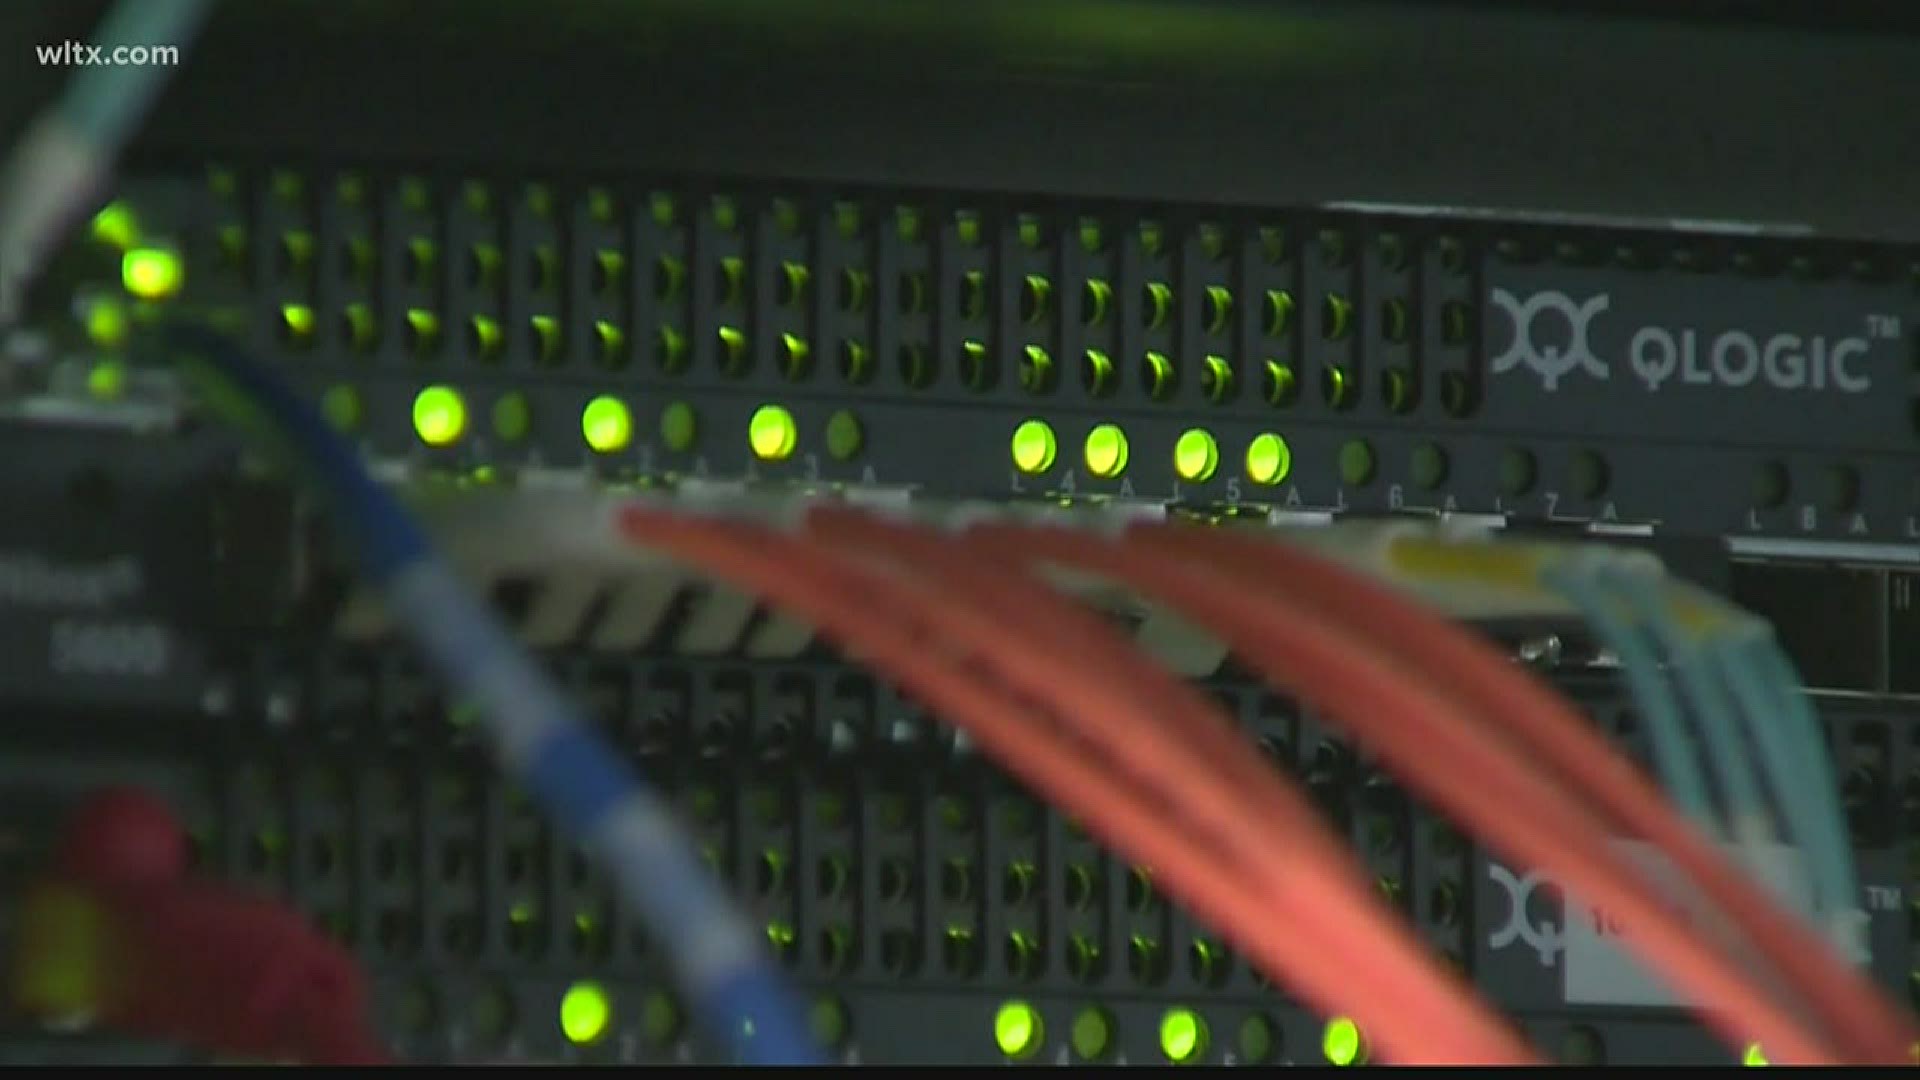 Tri-County Electric says it is working to get broadband to their all of their customers around the Midlands, especially in the Lower Richland area.